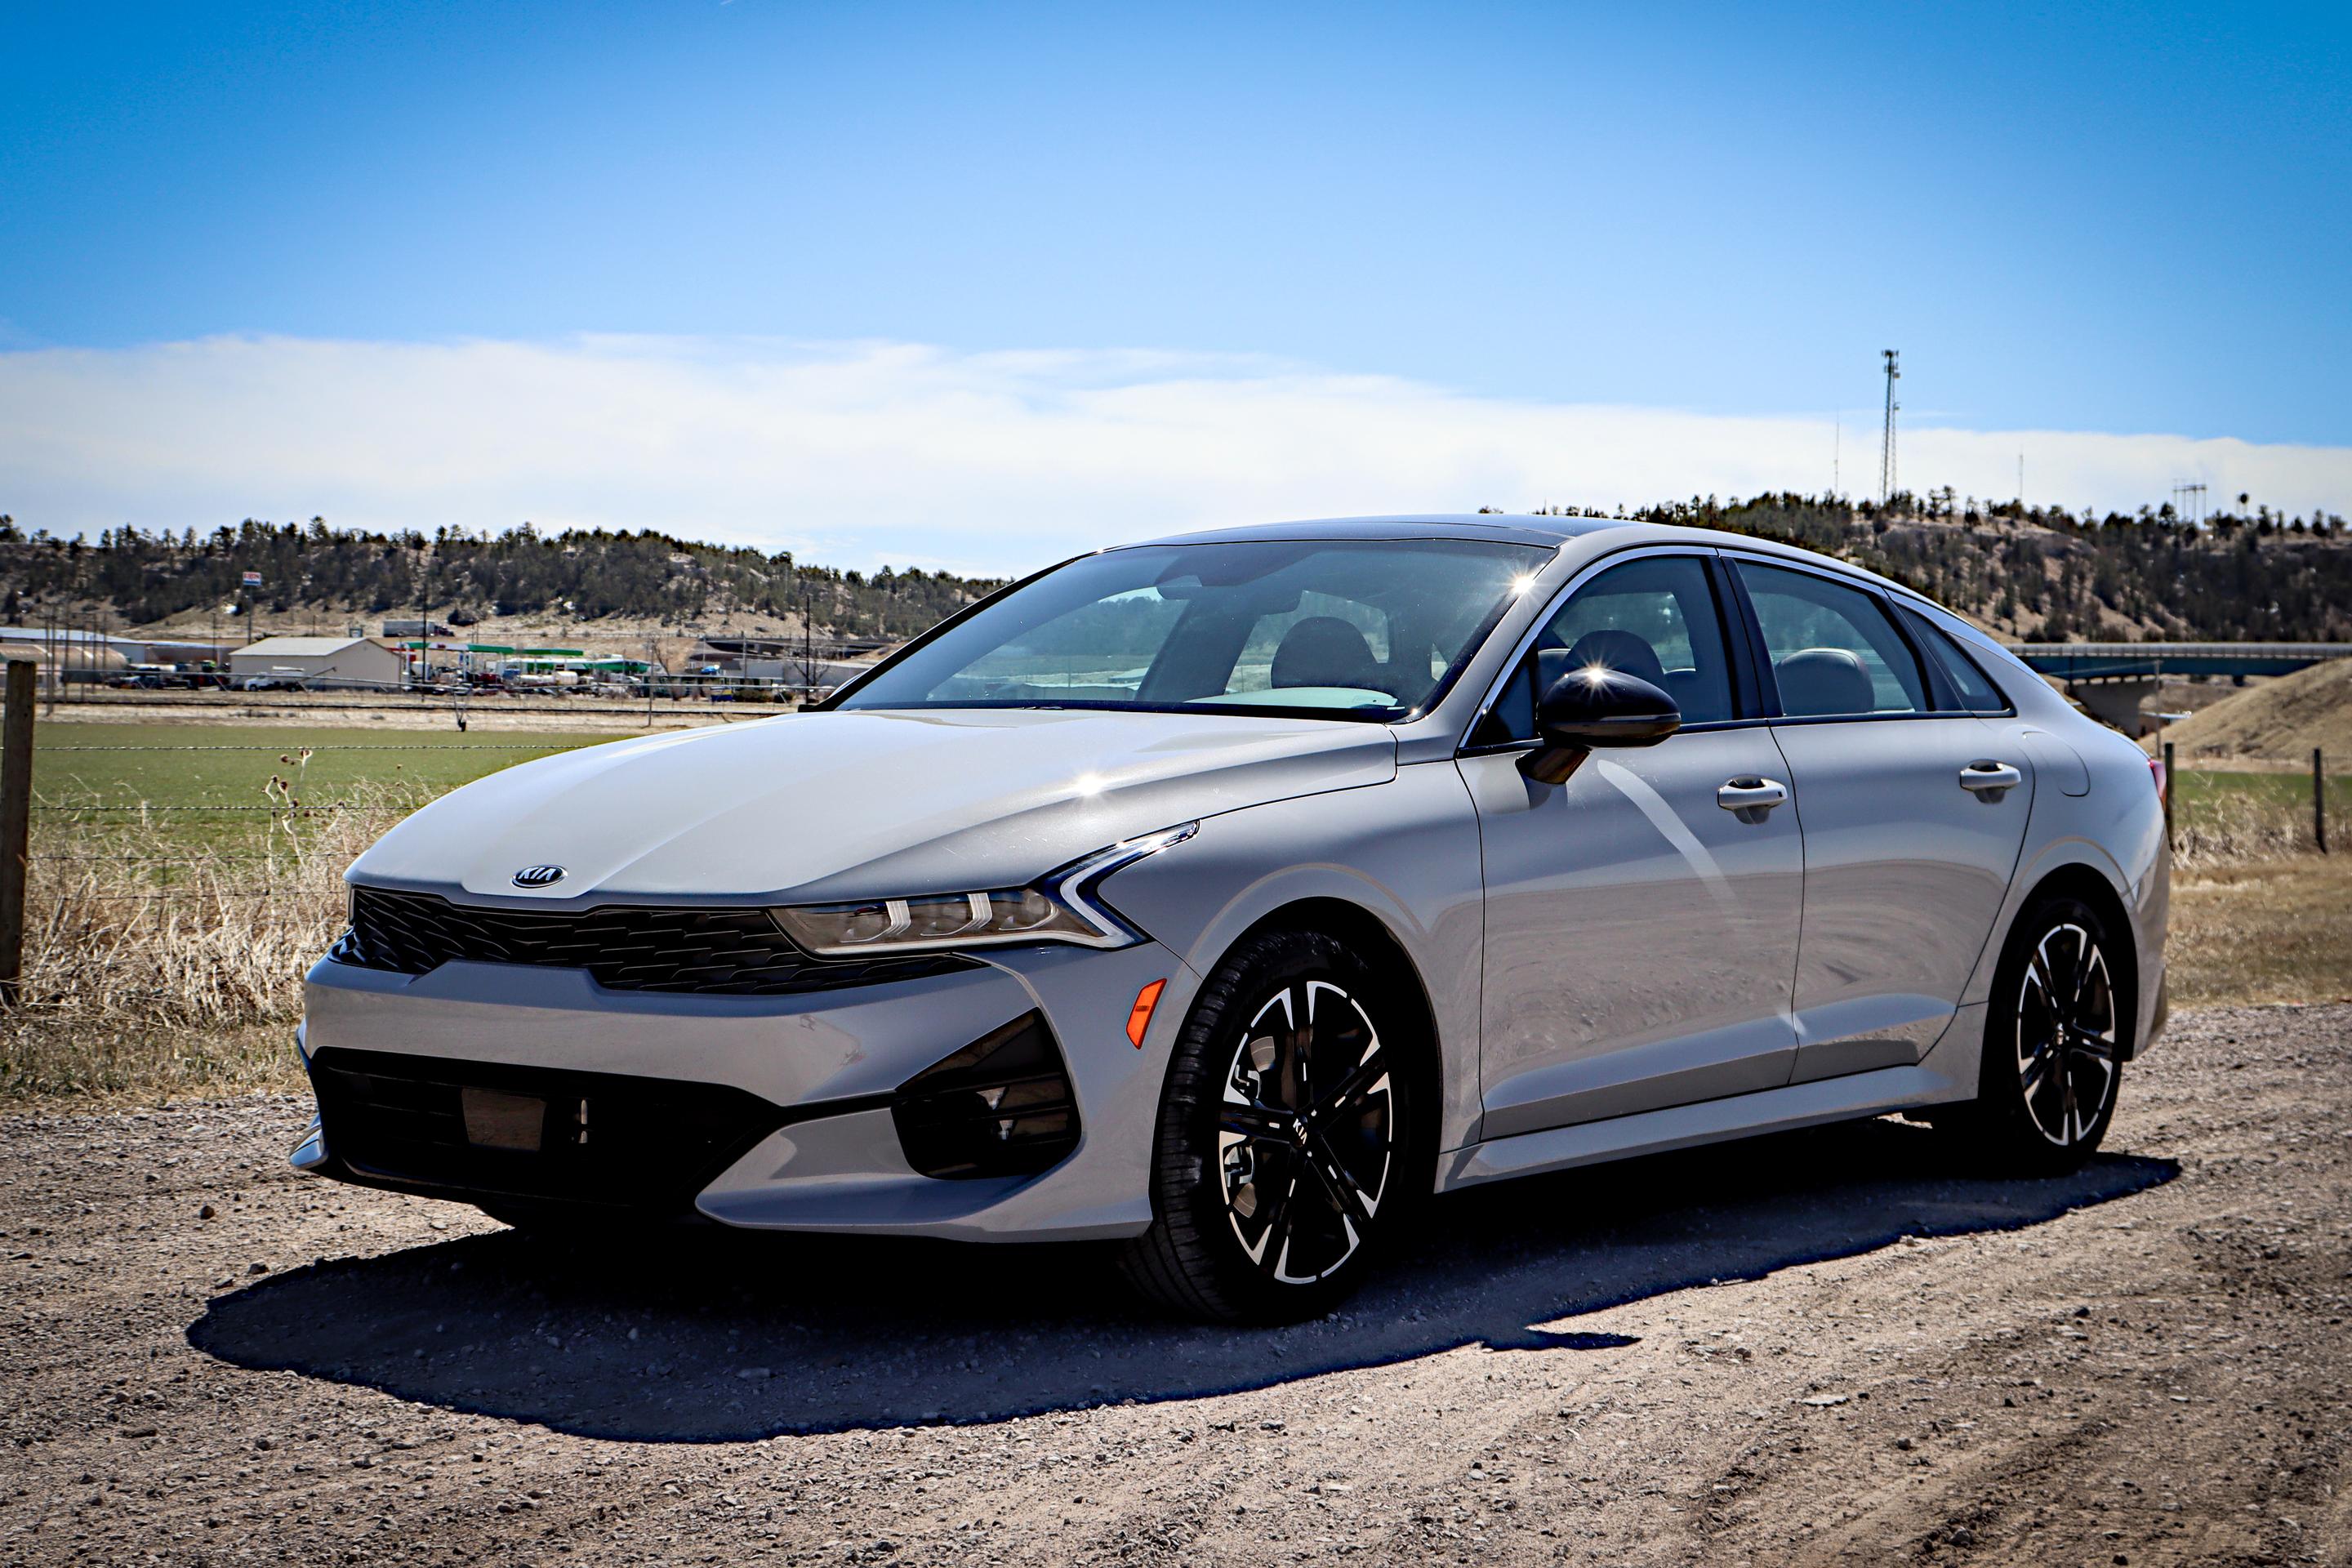 Review: 2021 Kia K5 takes over from the Optima